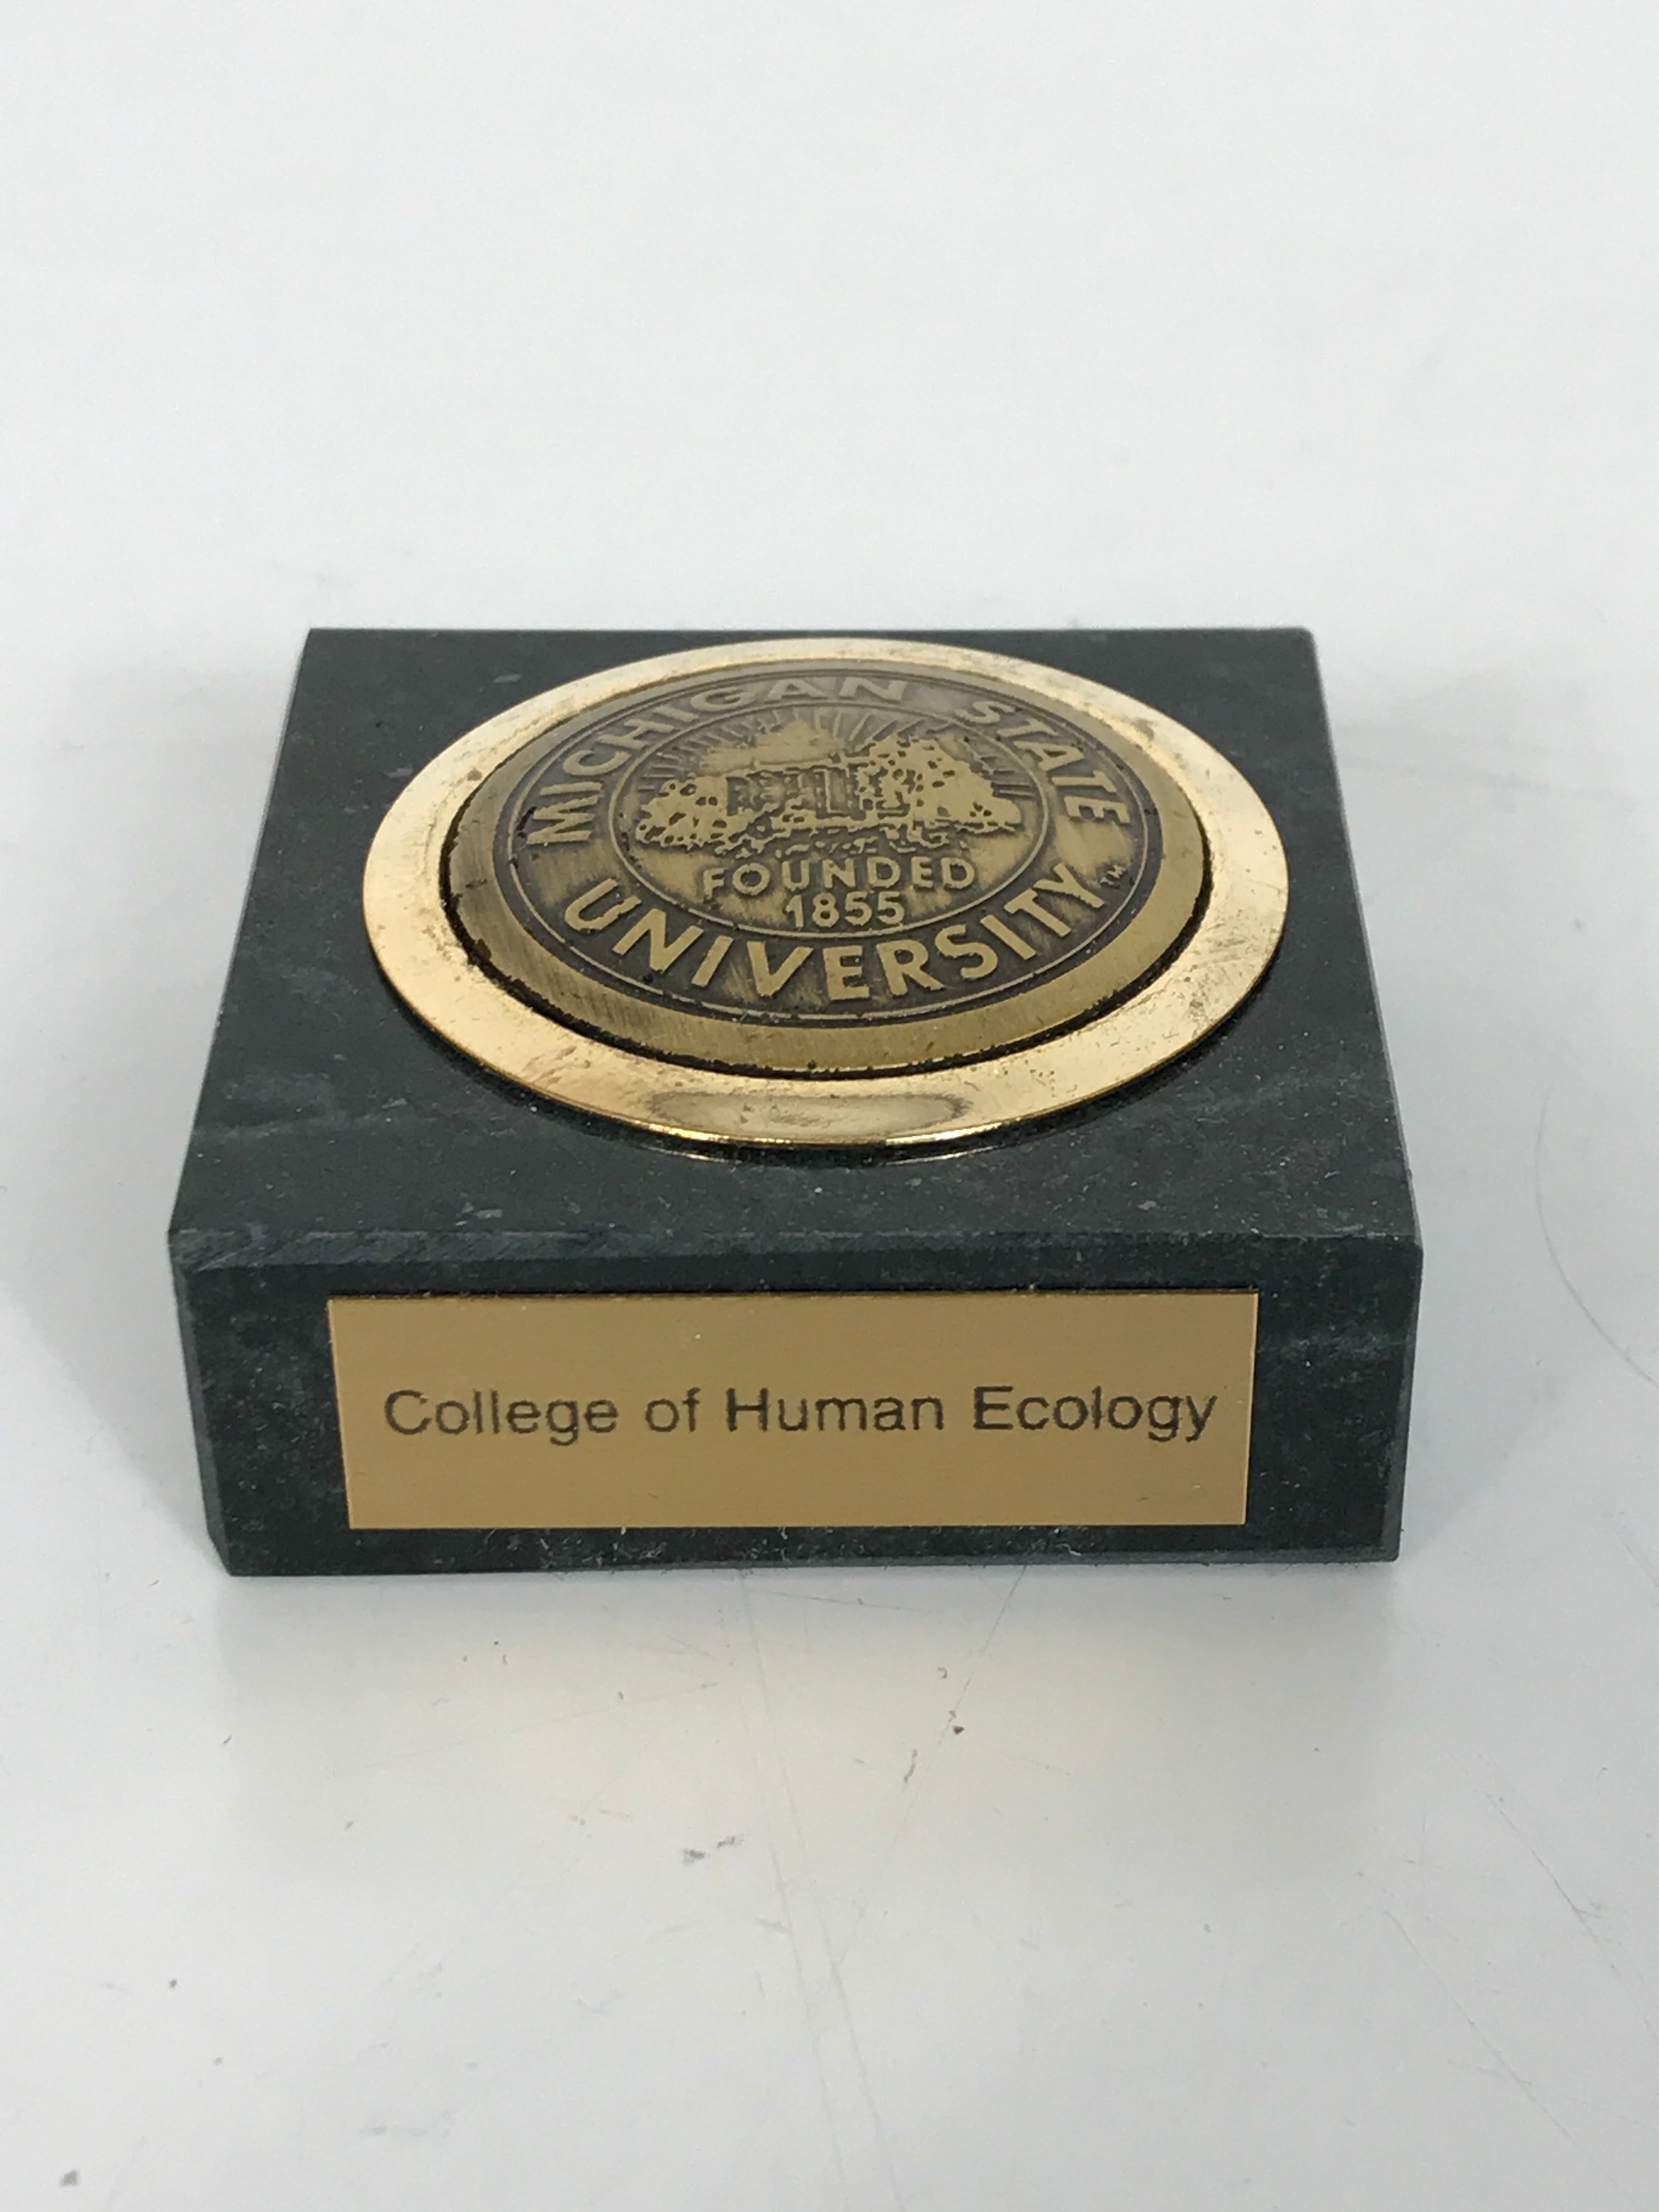 MSU College of Human Ecology Paperweight with University Seal